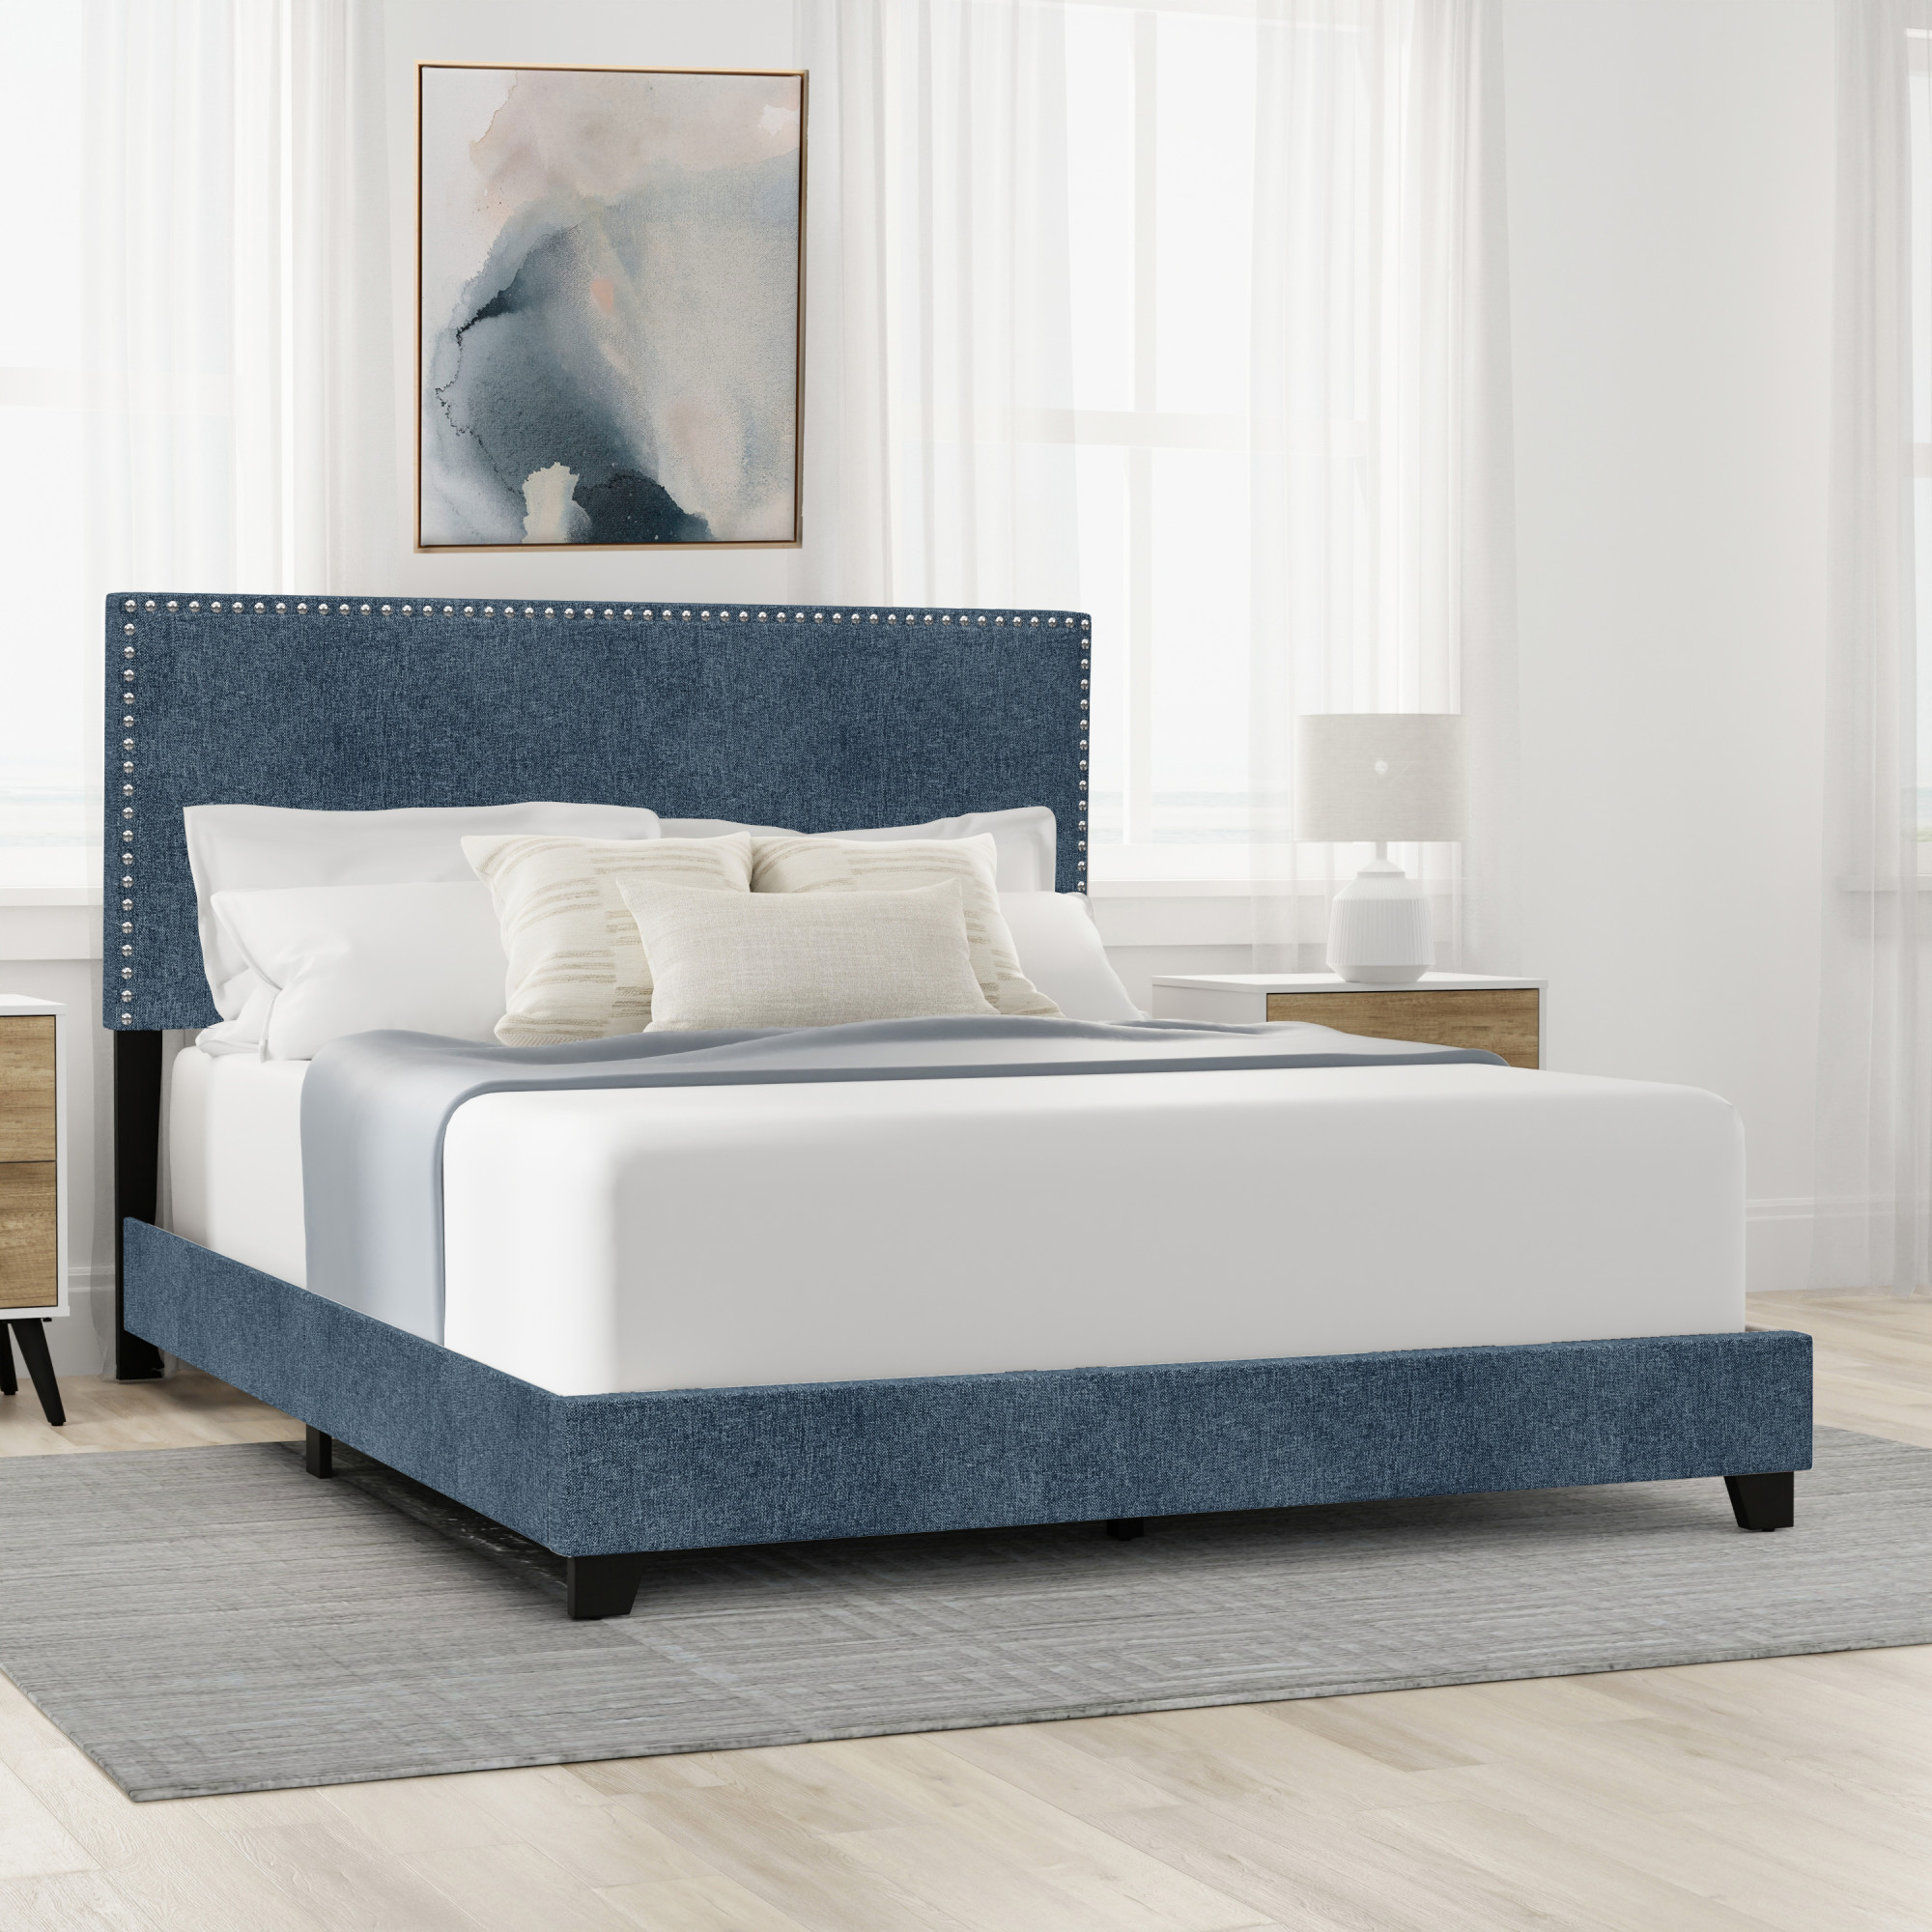 Willow Nailhead Trim Upholstered Queen Bed, Denim Fabric - image 1 of 17